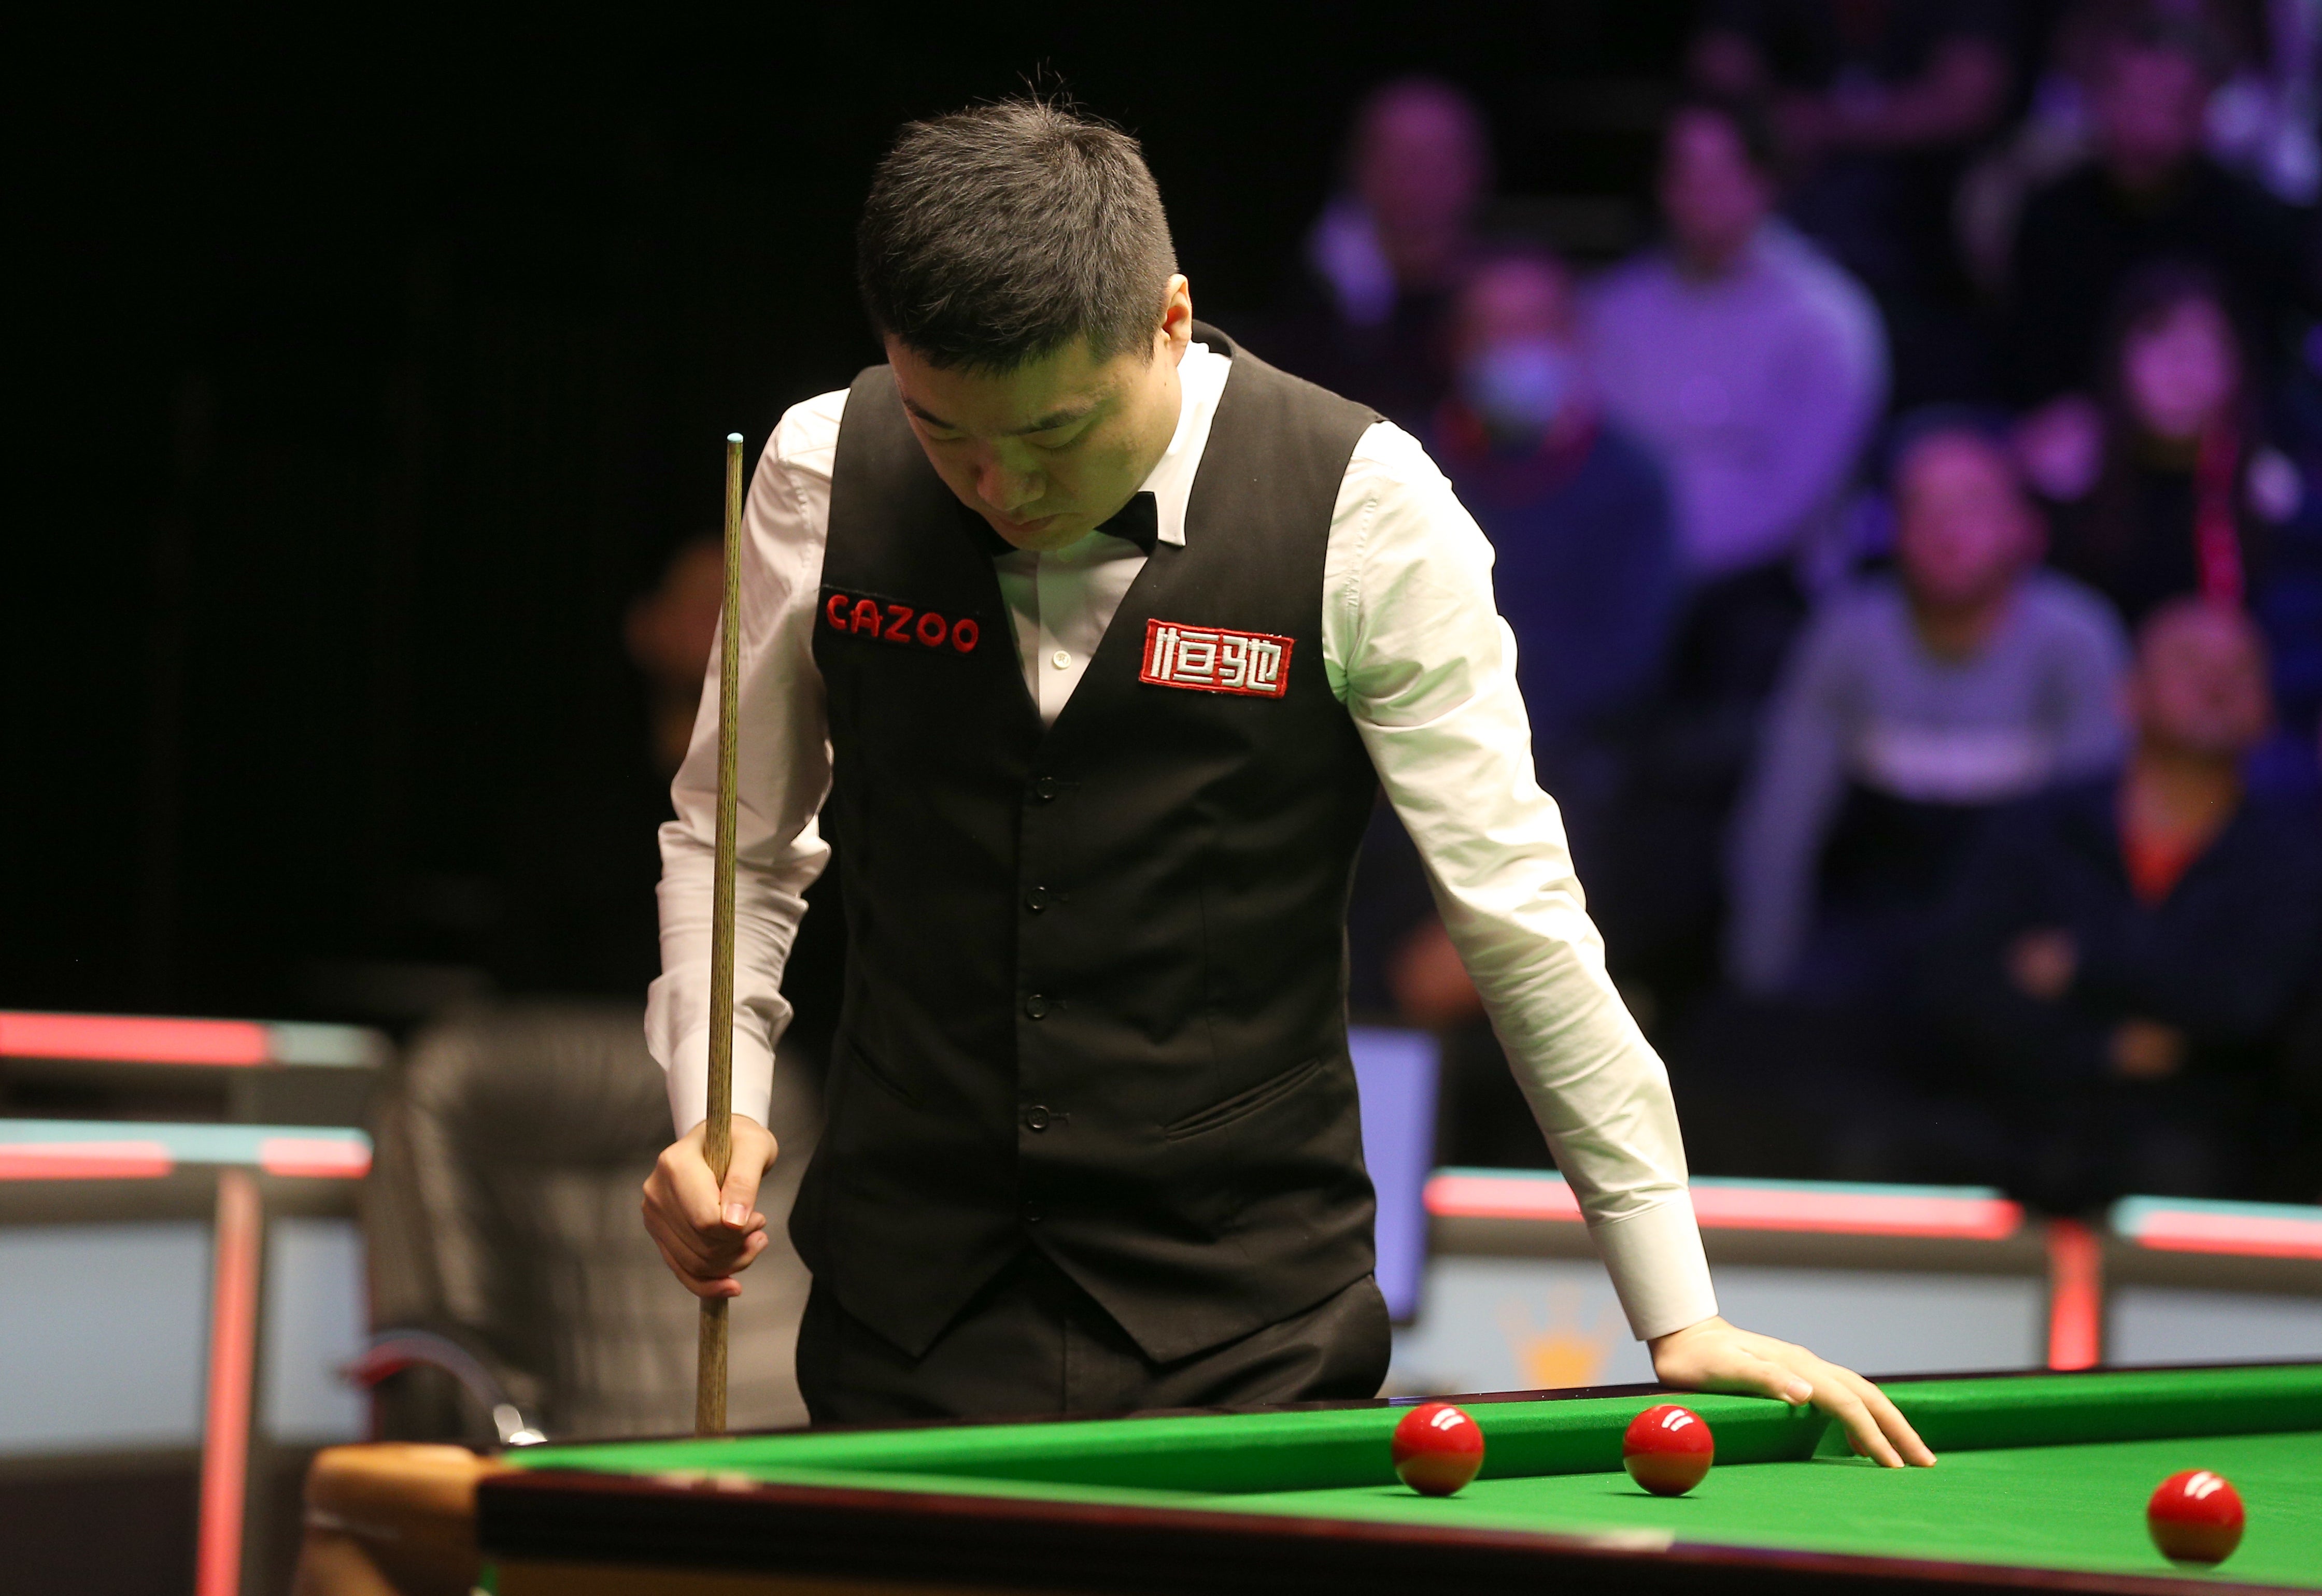 Ding Junhui suffered a defeat (Nigel French/PA)